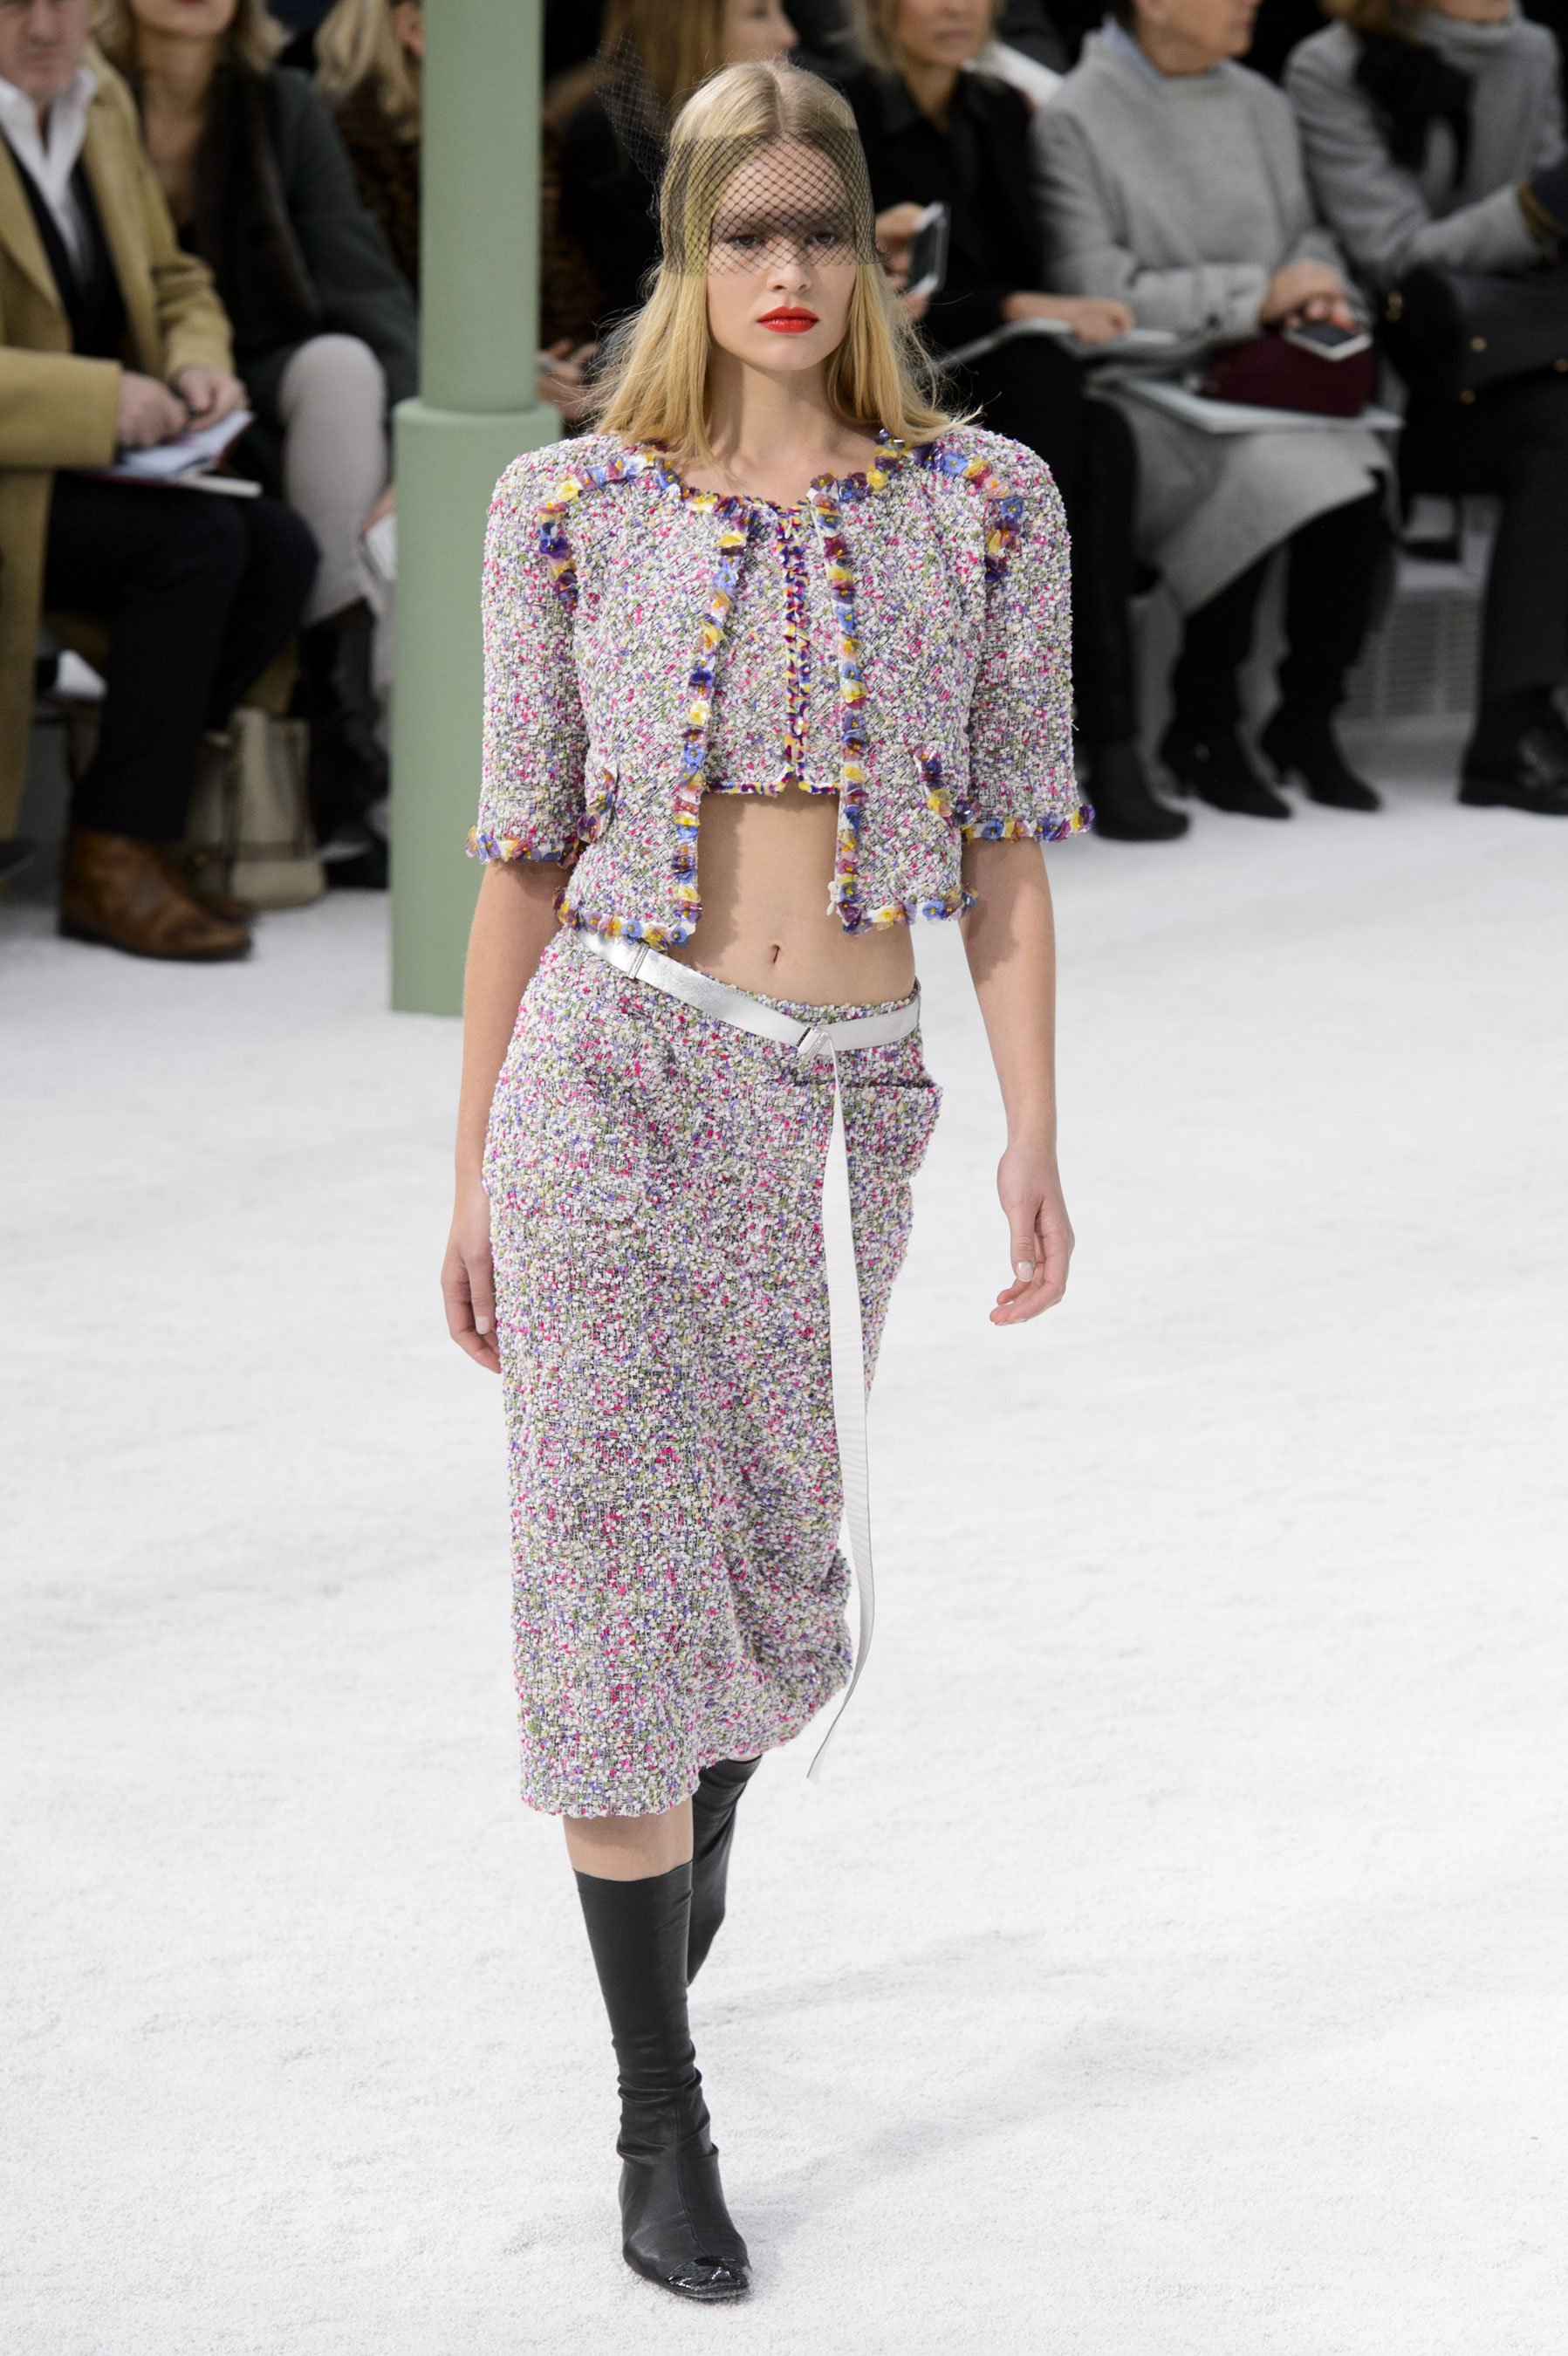 chanel haute couture spring 2015 pfw 19 ewers